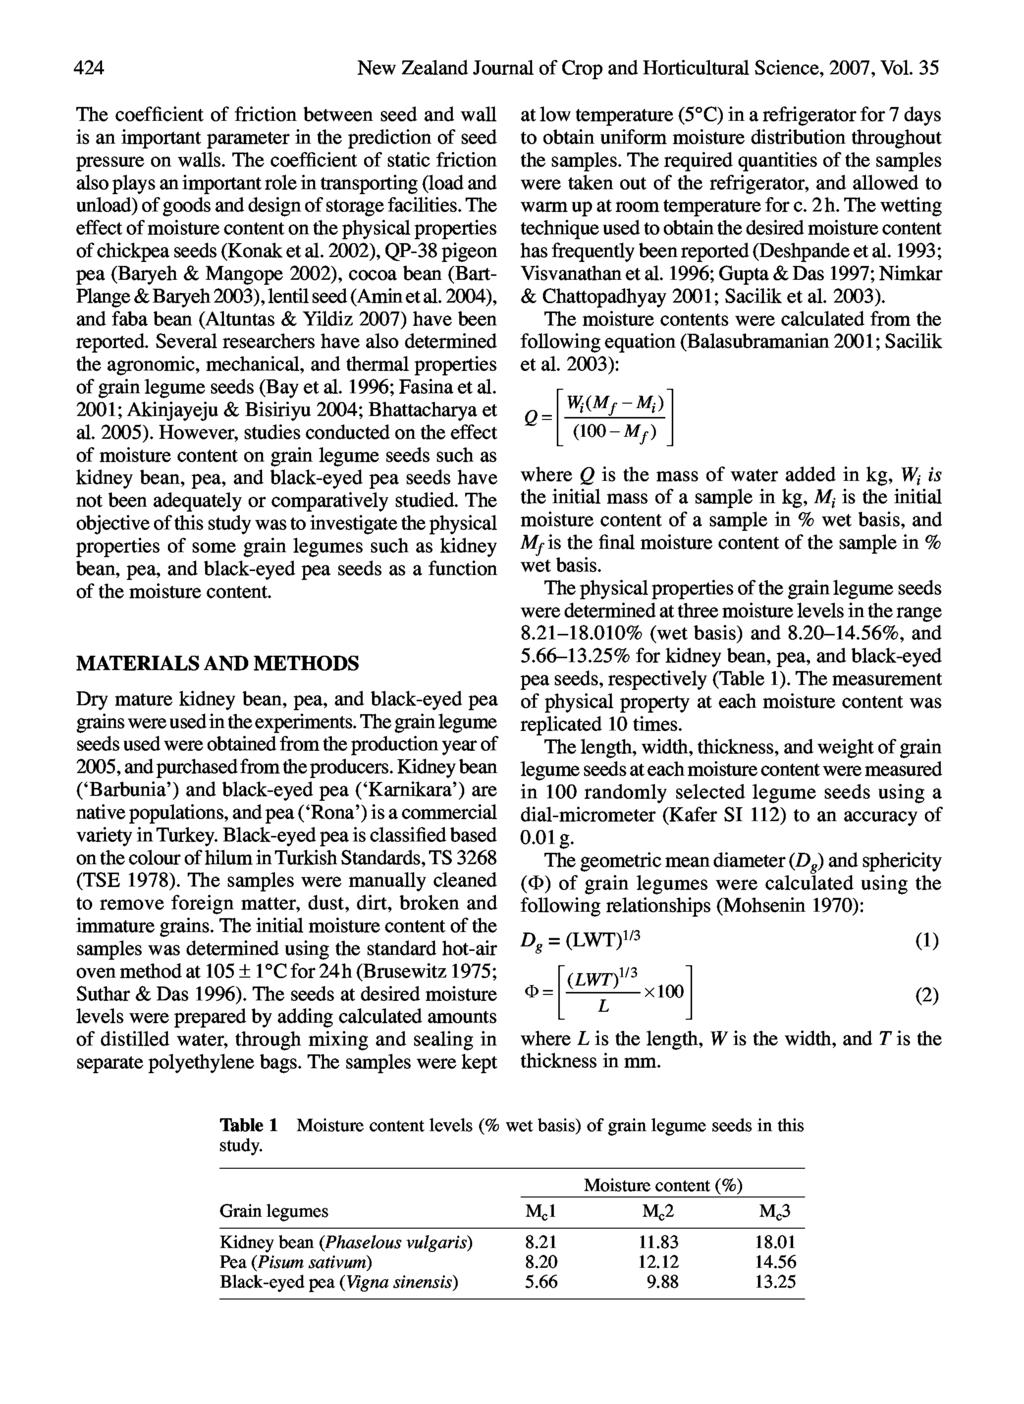 424 new Zealand Journal of Crop and Horticultural science, 2007, Vol. 35 The coefficient of friction between seed and wall is an important parameter in the prediction of seed pressure on walls.